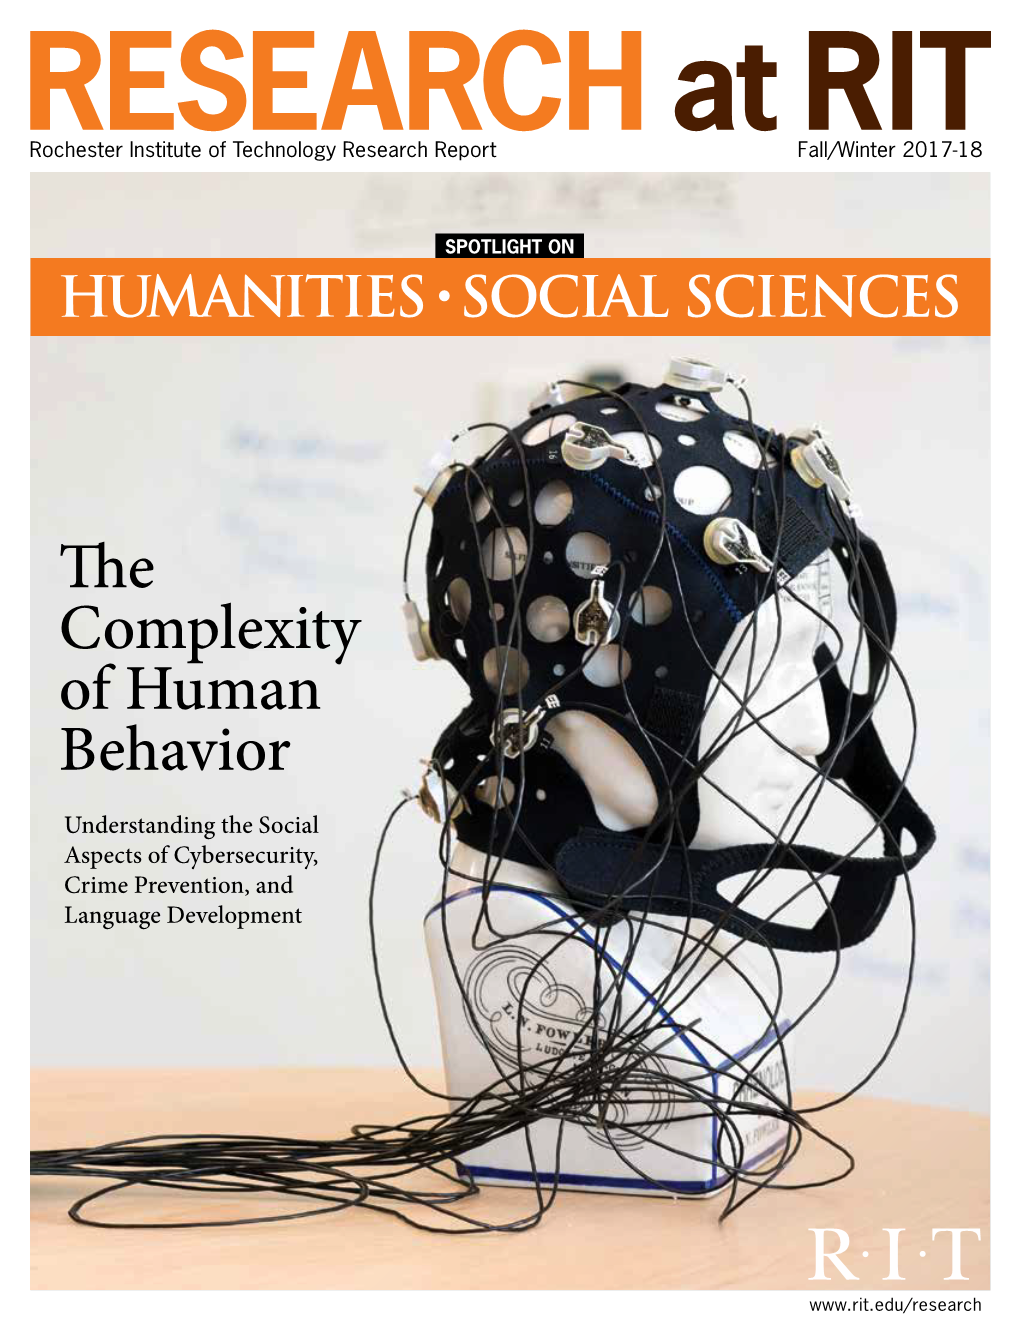 The Complexity of Human Behavior Understanding the Social Aspects of Cybersecurity, Crime Prevention, and Language Development